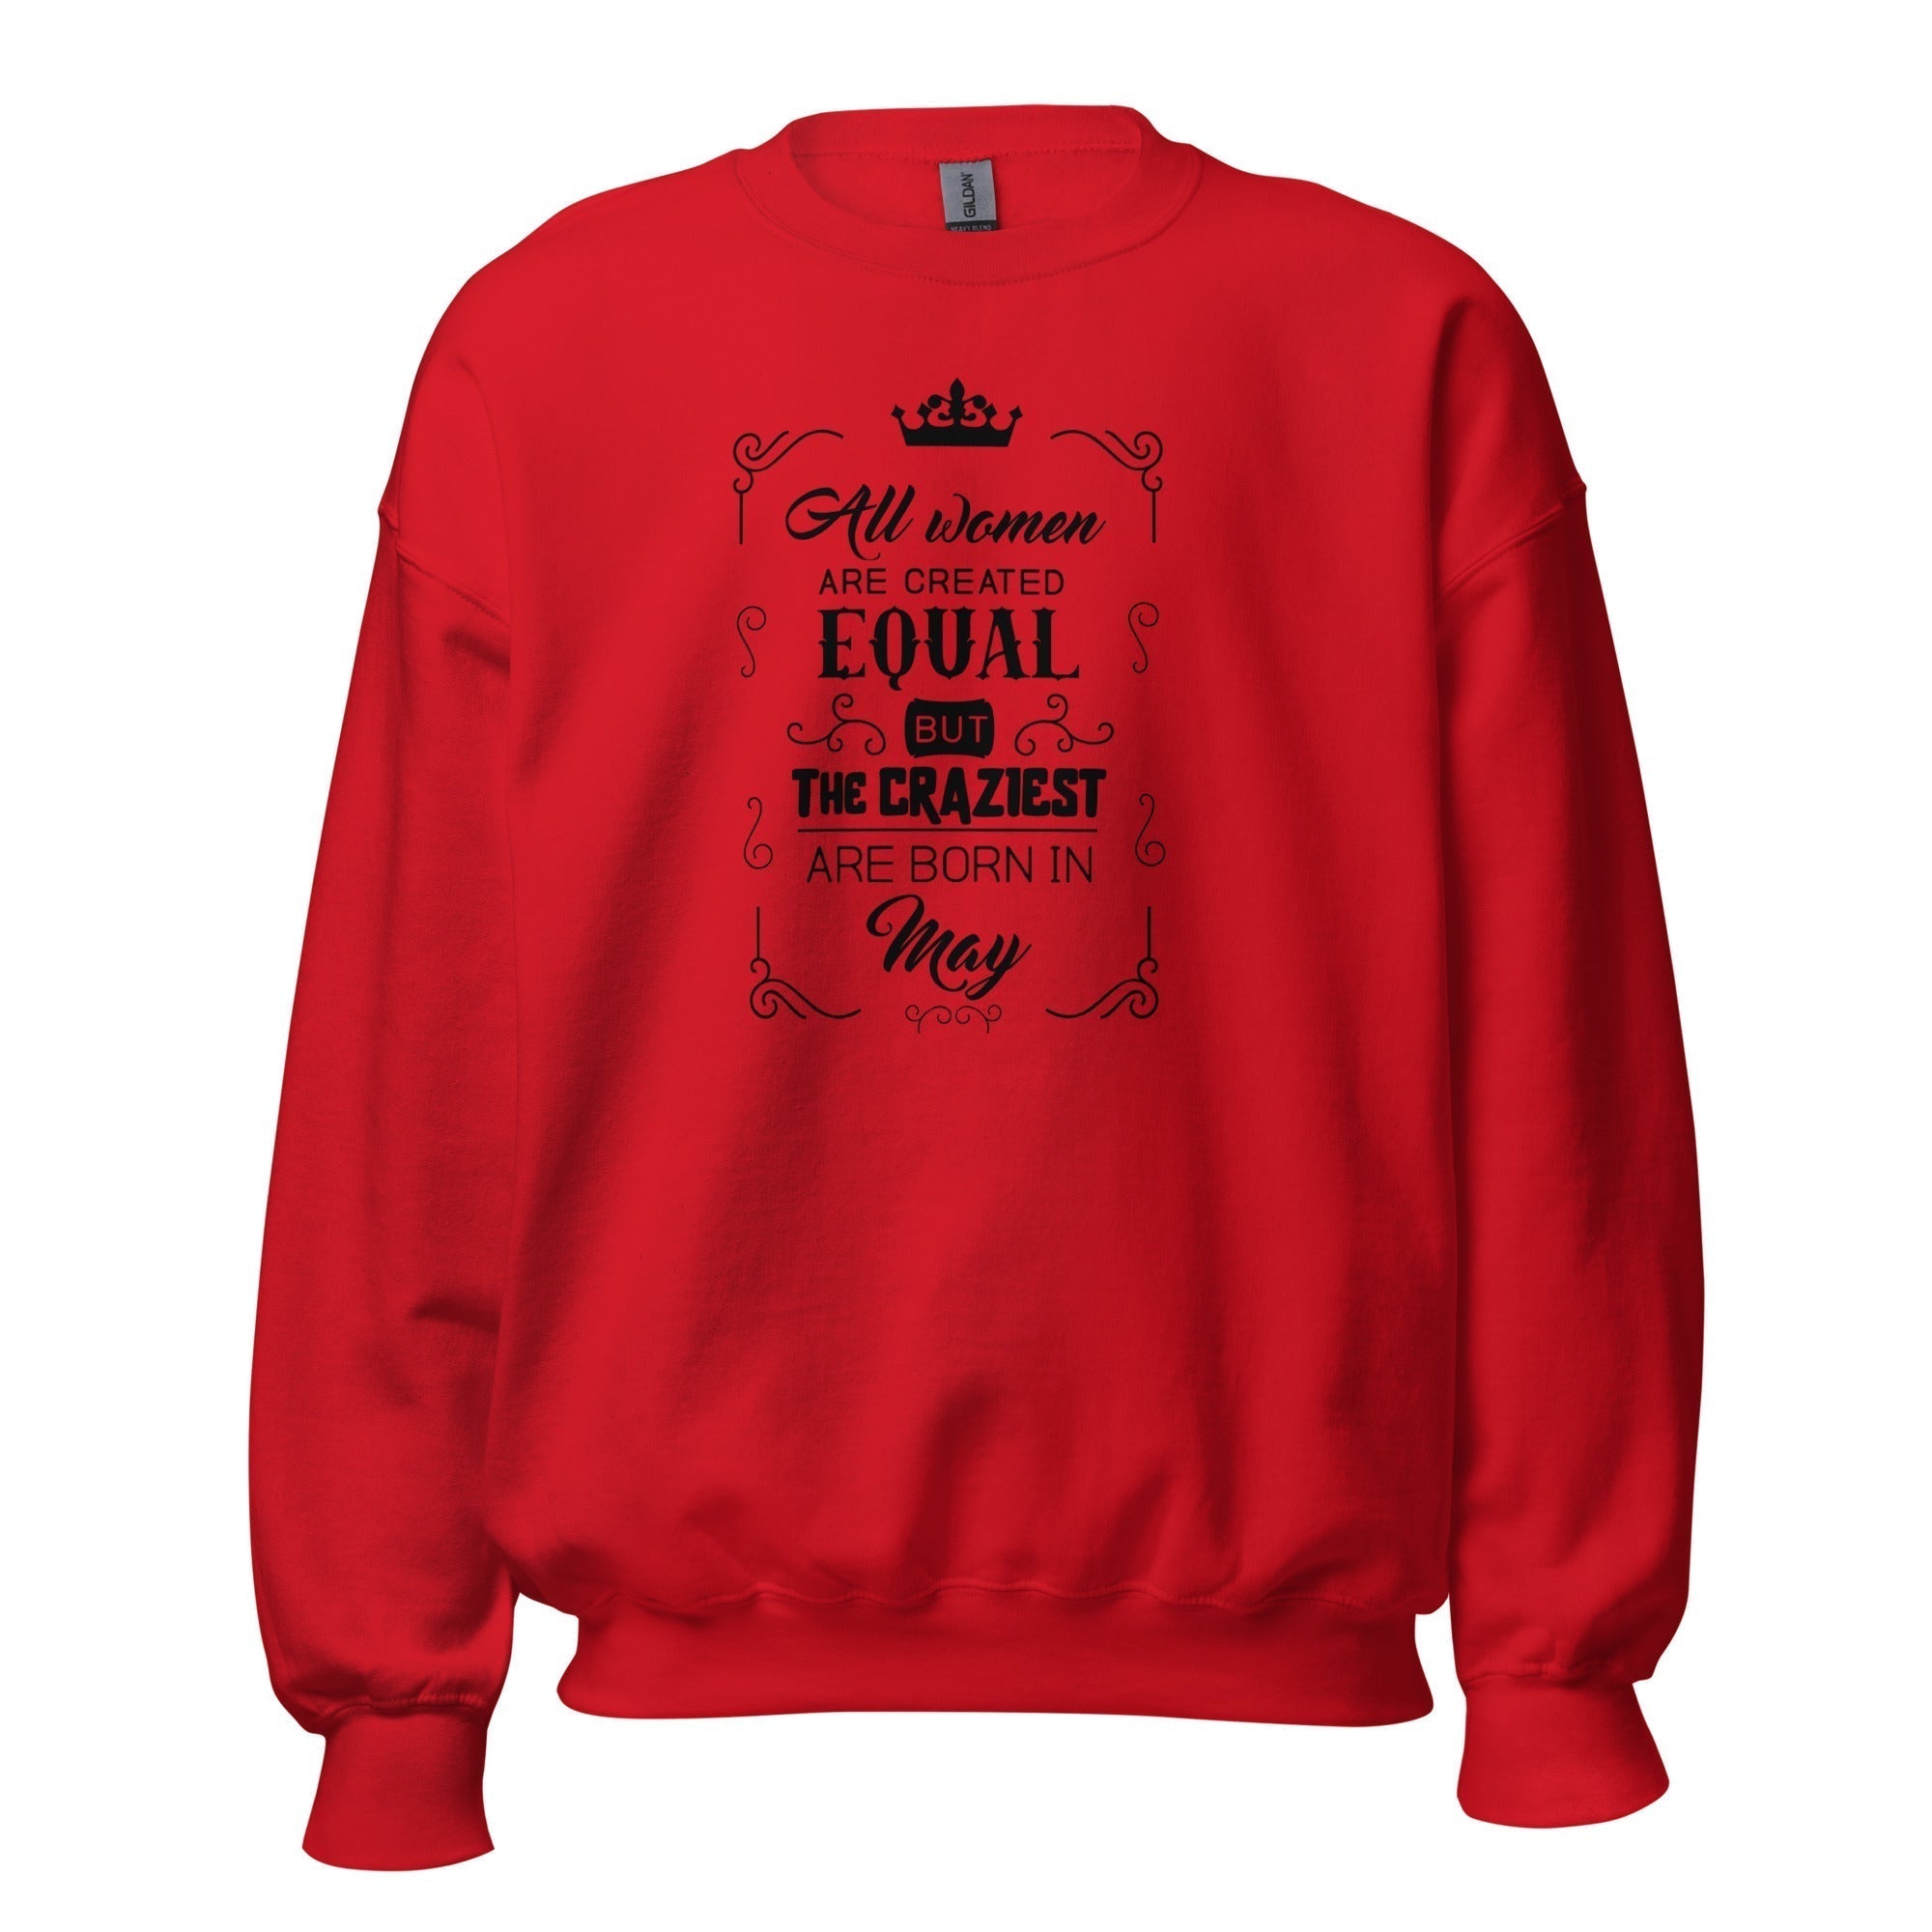 Women's Crew Neck Sweatshirt - All Women Are Created Equal But The Craziest Are Born In May - GRAPHIC T-SHIRTS